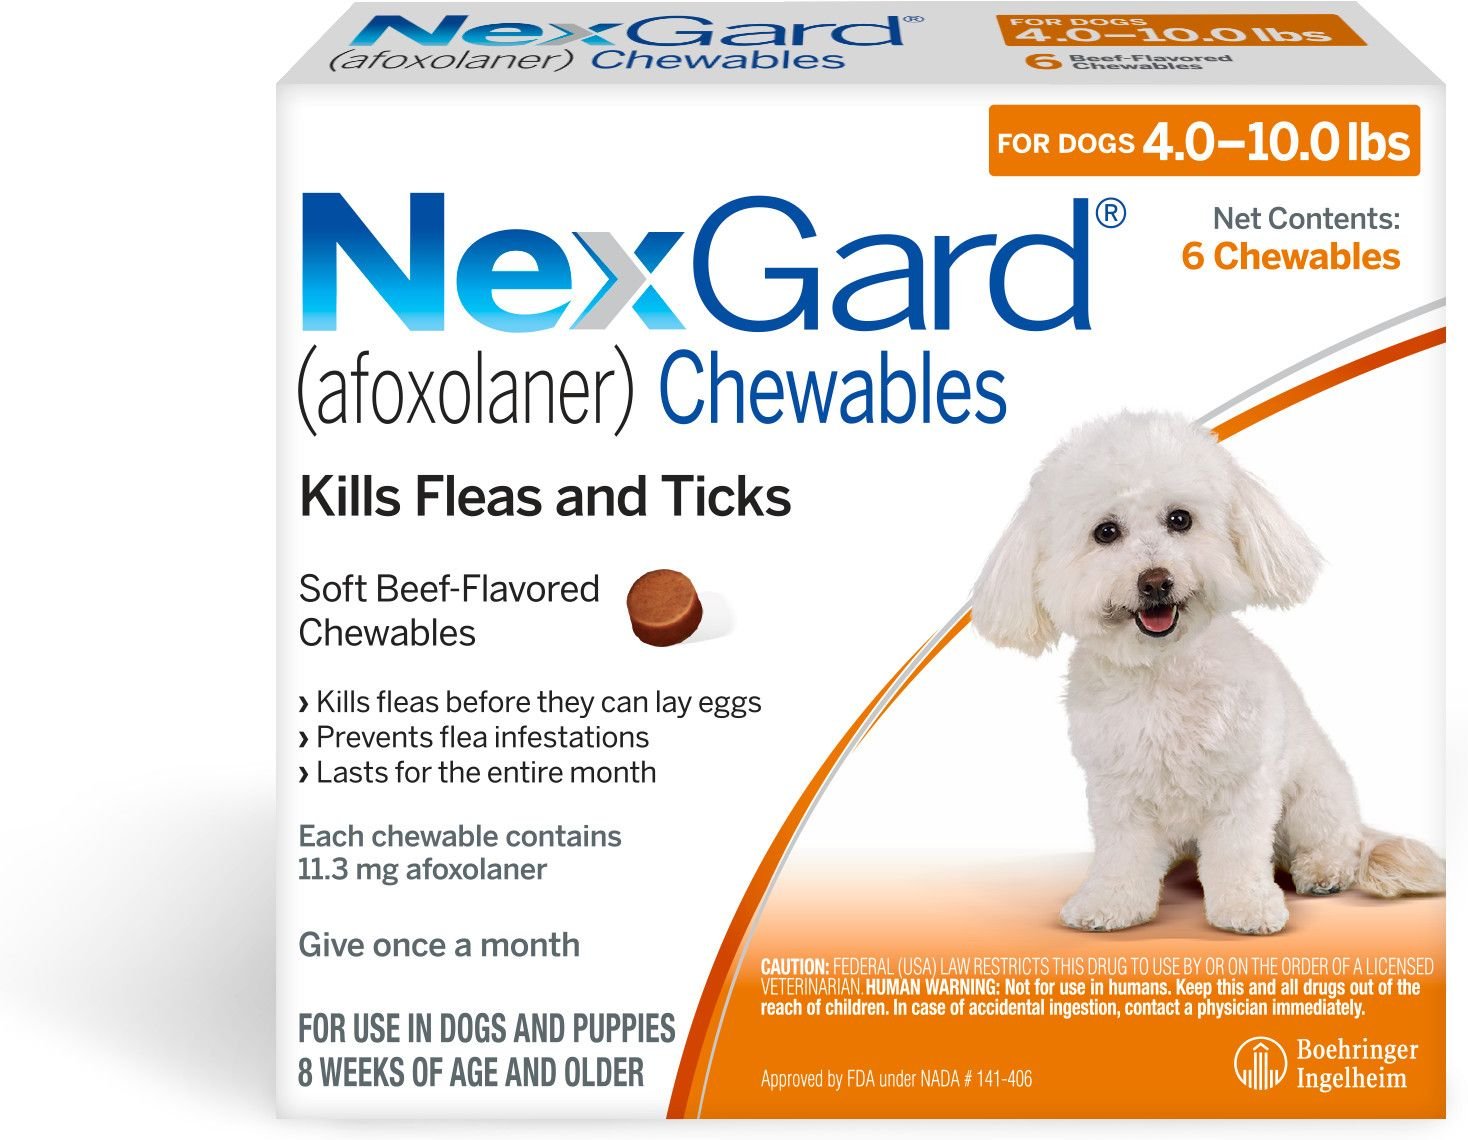 NexGard Chewable Tablets for Dogs, 4-10 lbs, 6 treatments (Orange Box)